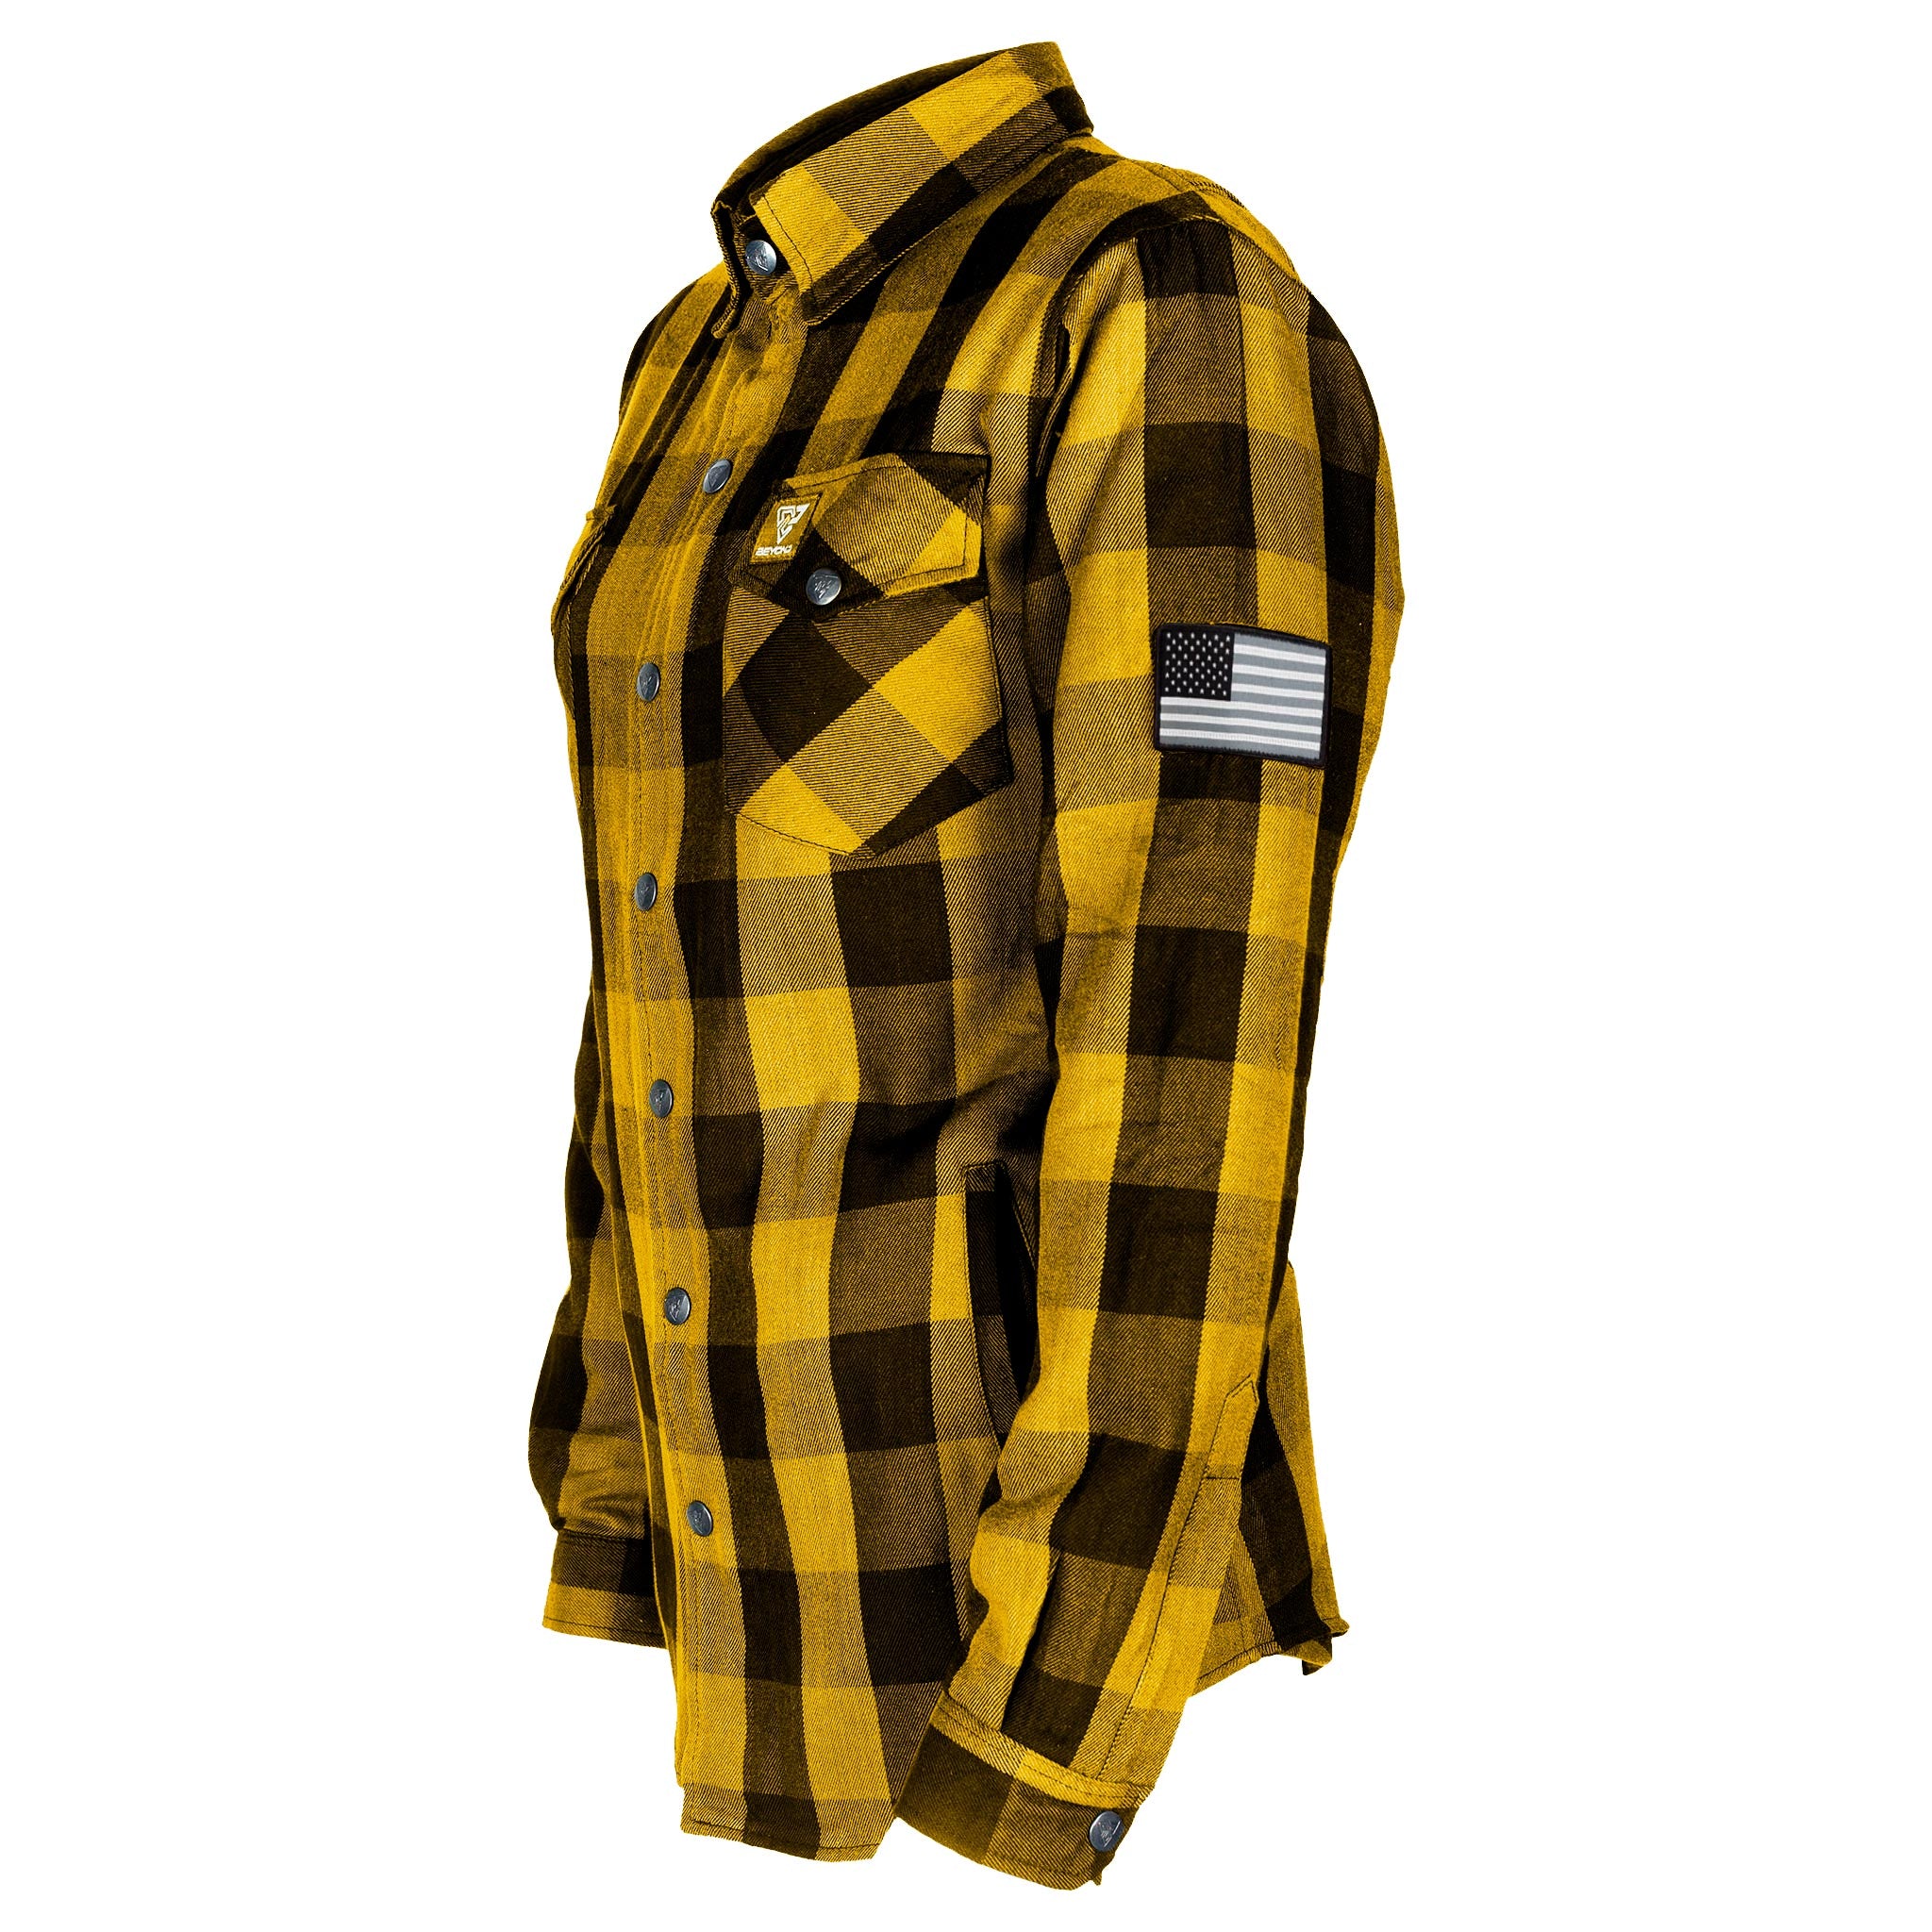 Protective Flannel Shirt for Women "Blaze of Glory" - Yellow and Black Checkered with Pads